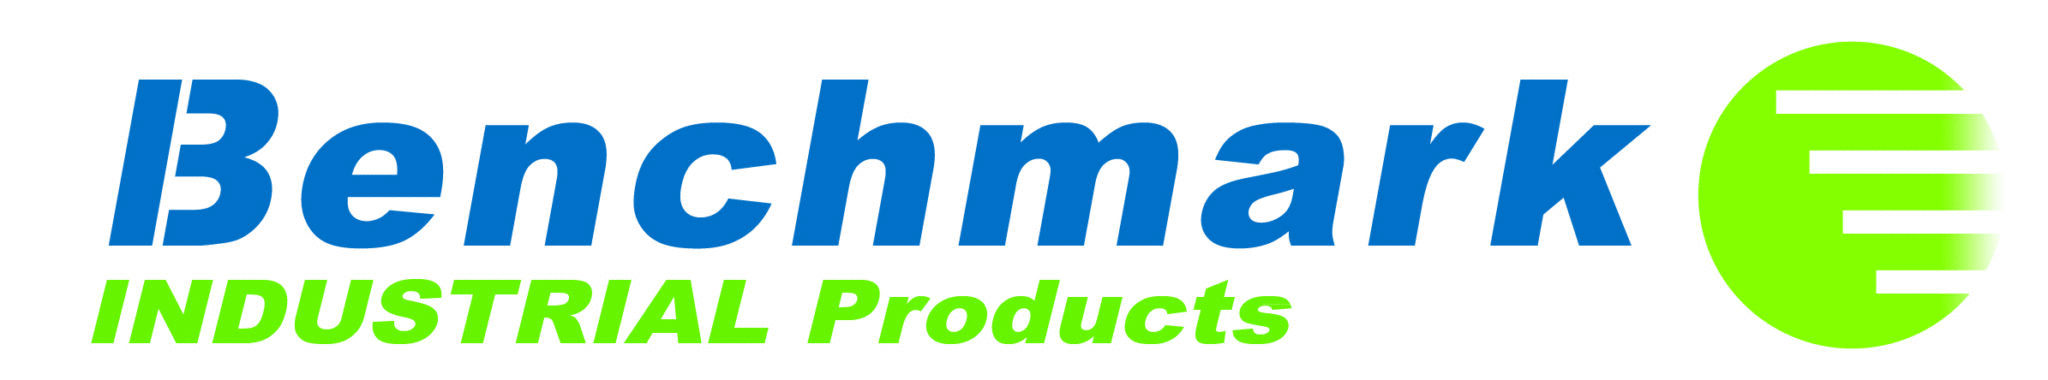 B_Benchmark-Industrial-Products_LOGO_9-26-22